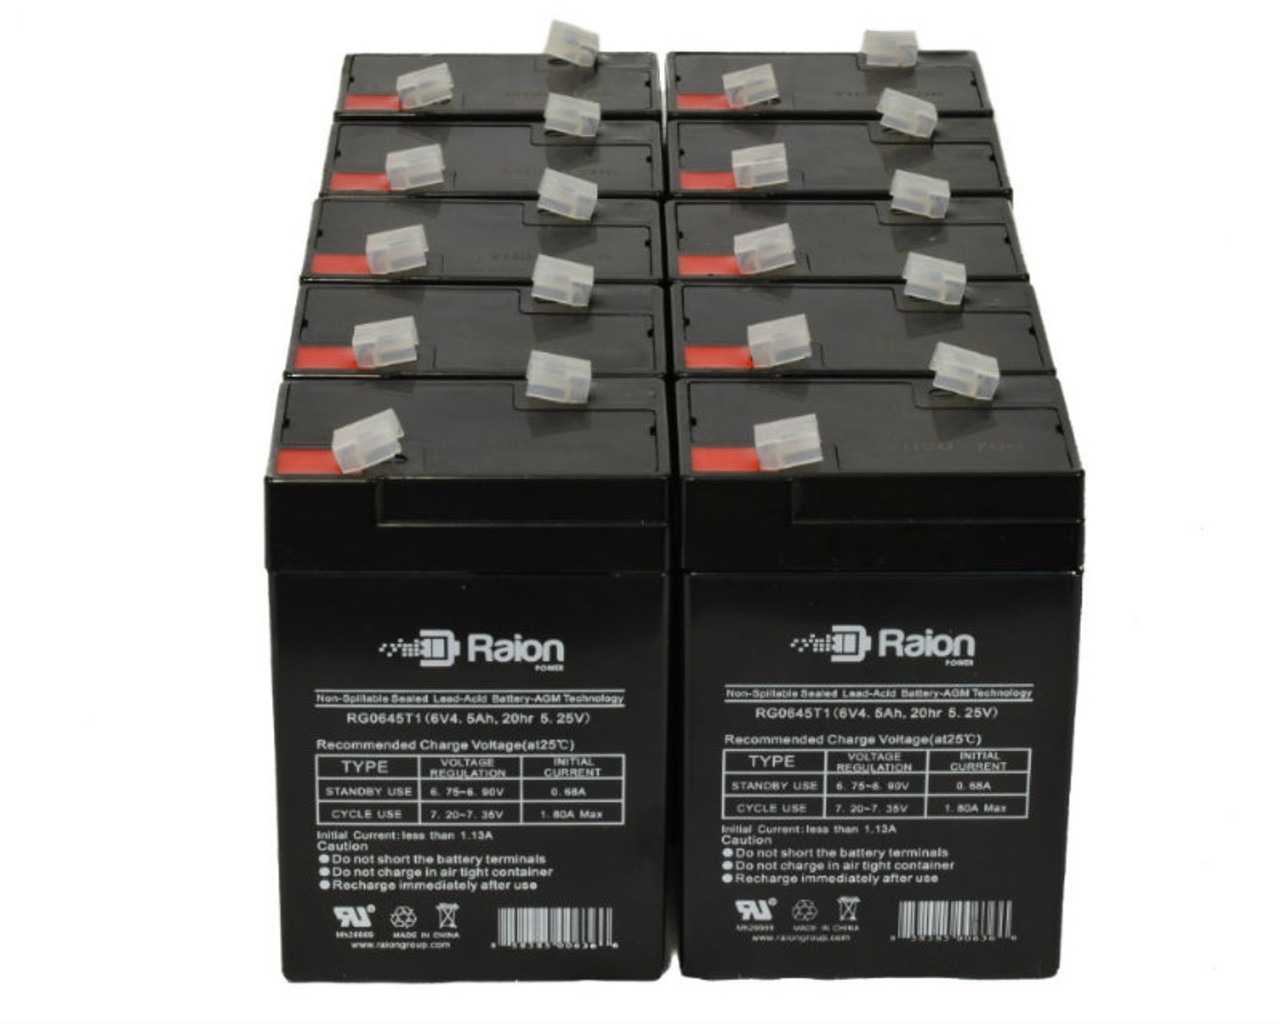 Raion Power 6V 4.5Ah Replacement Emergency Light Battery for Light Alarms U8 - 10 Pack